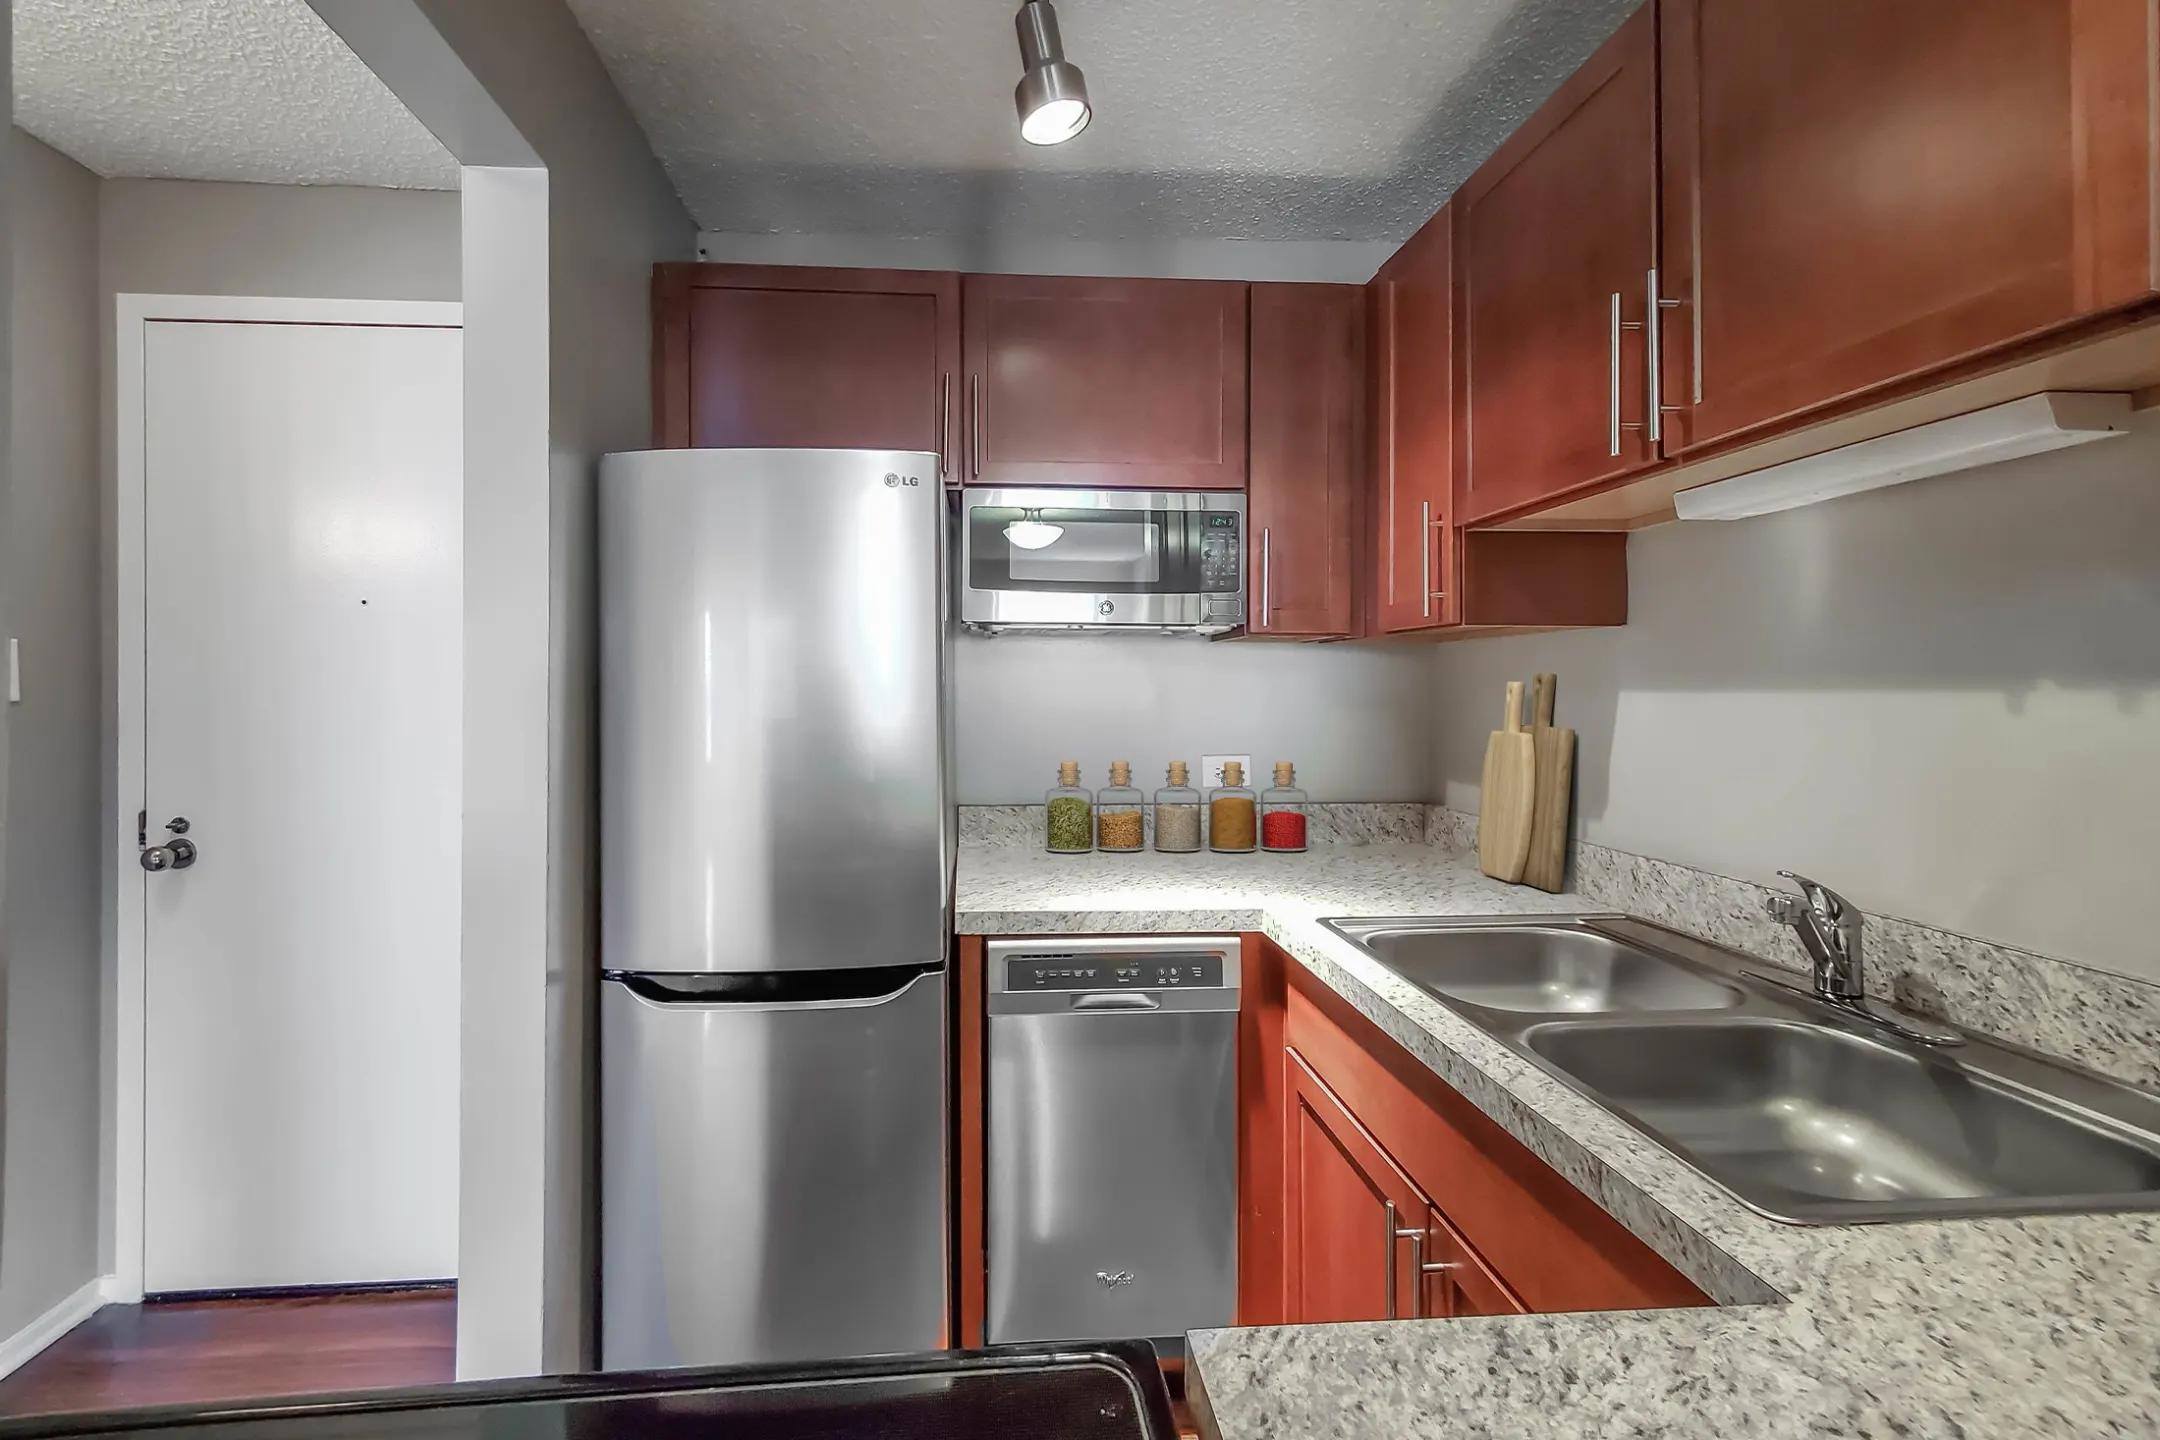 Kitchen - Axis Apartments and Lofts - Chicago, IL